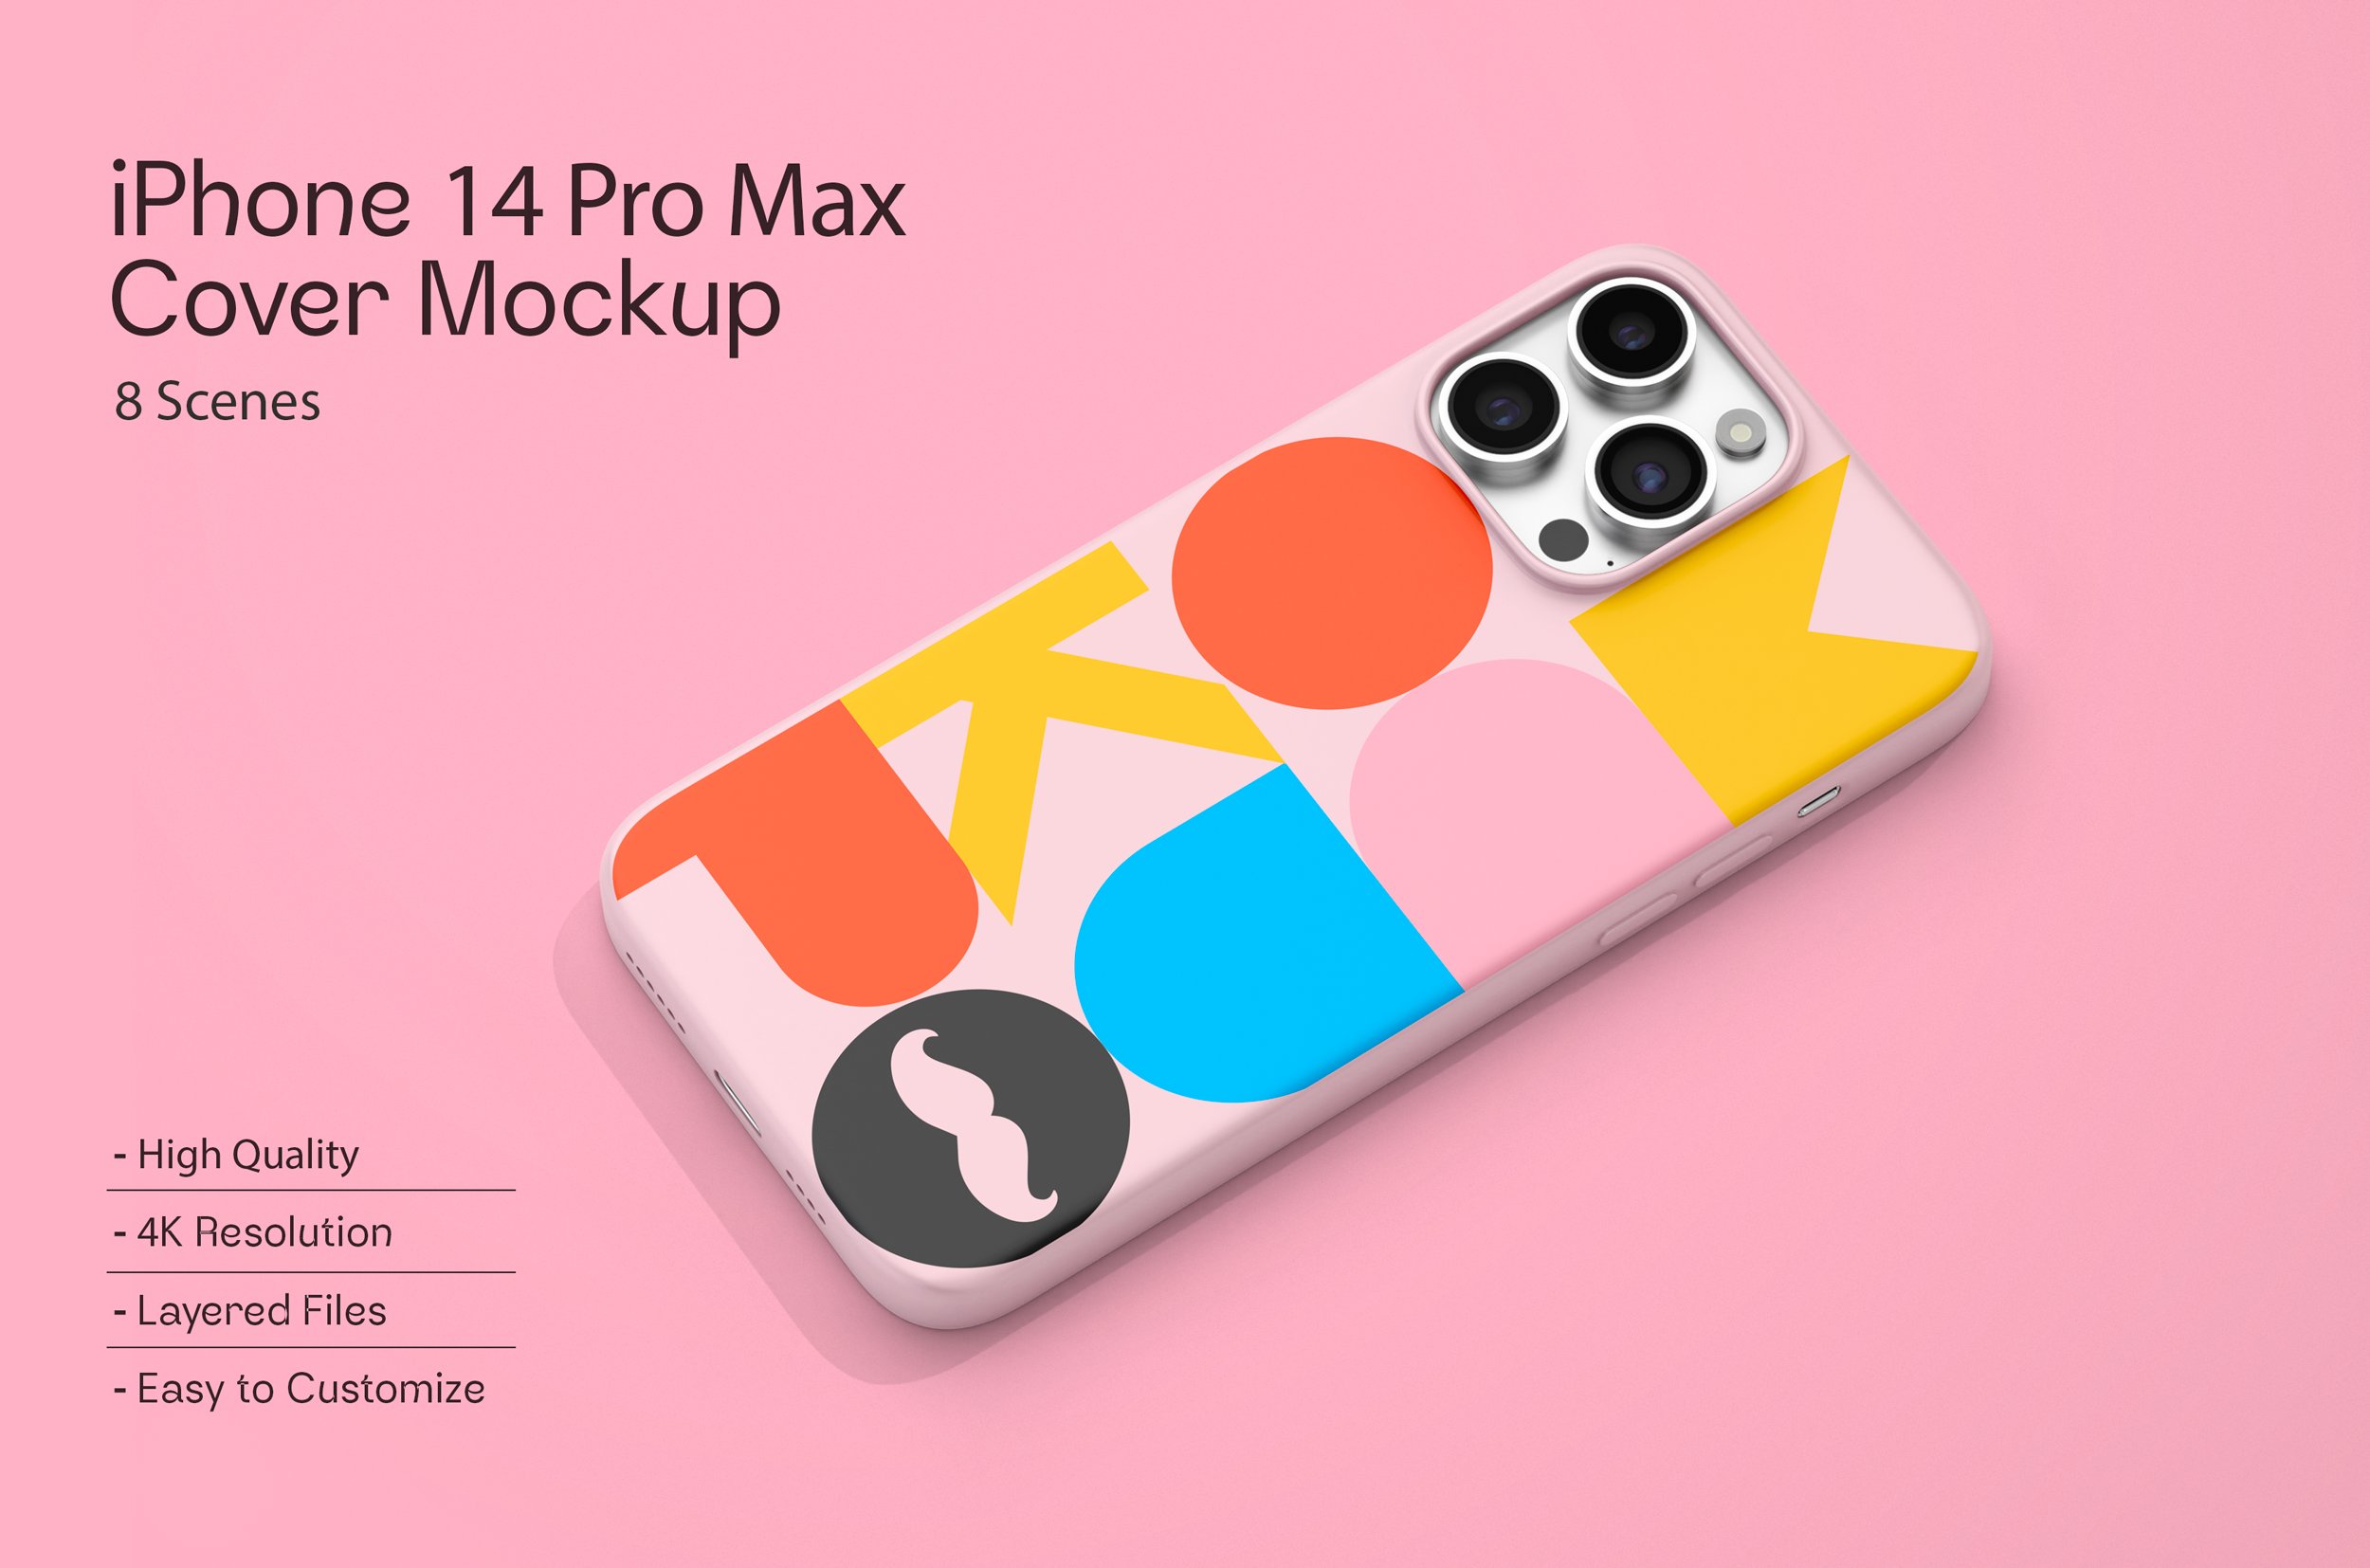 iPhone 14 Pro Max Case Mockup cover image.